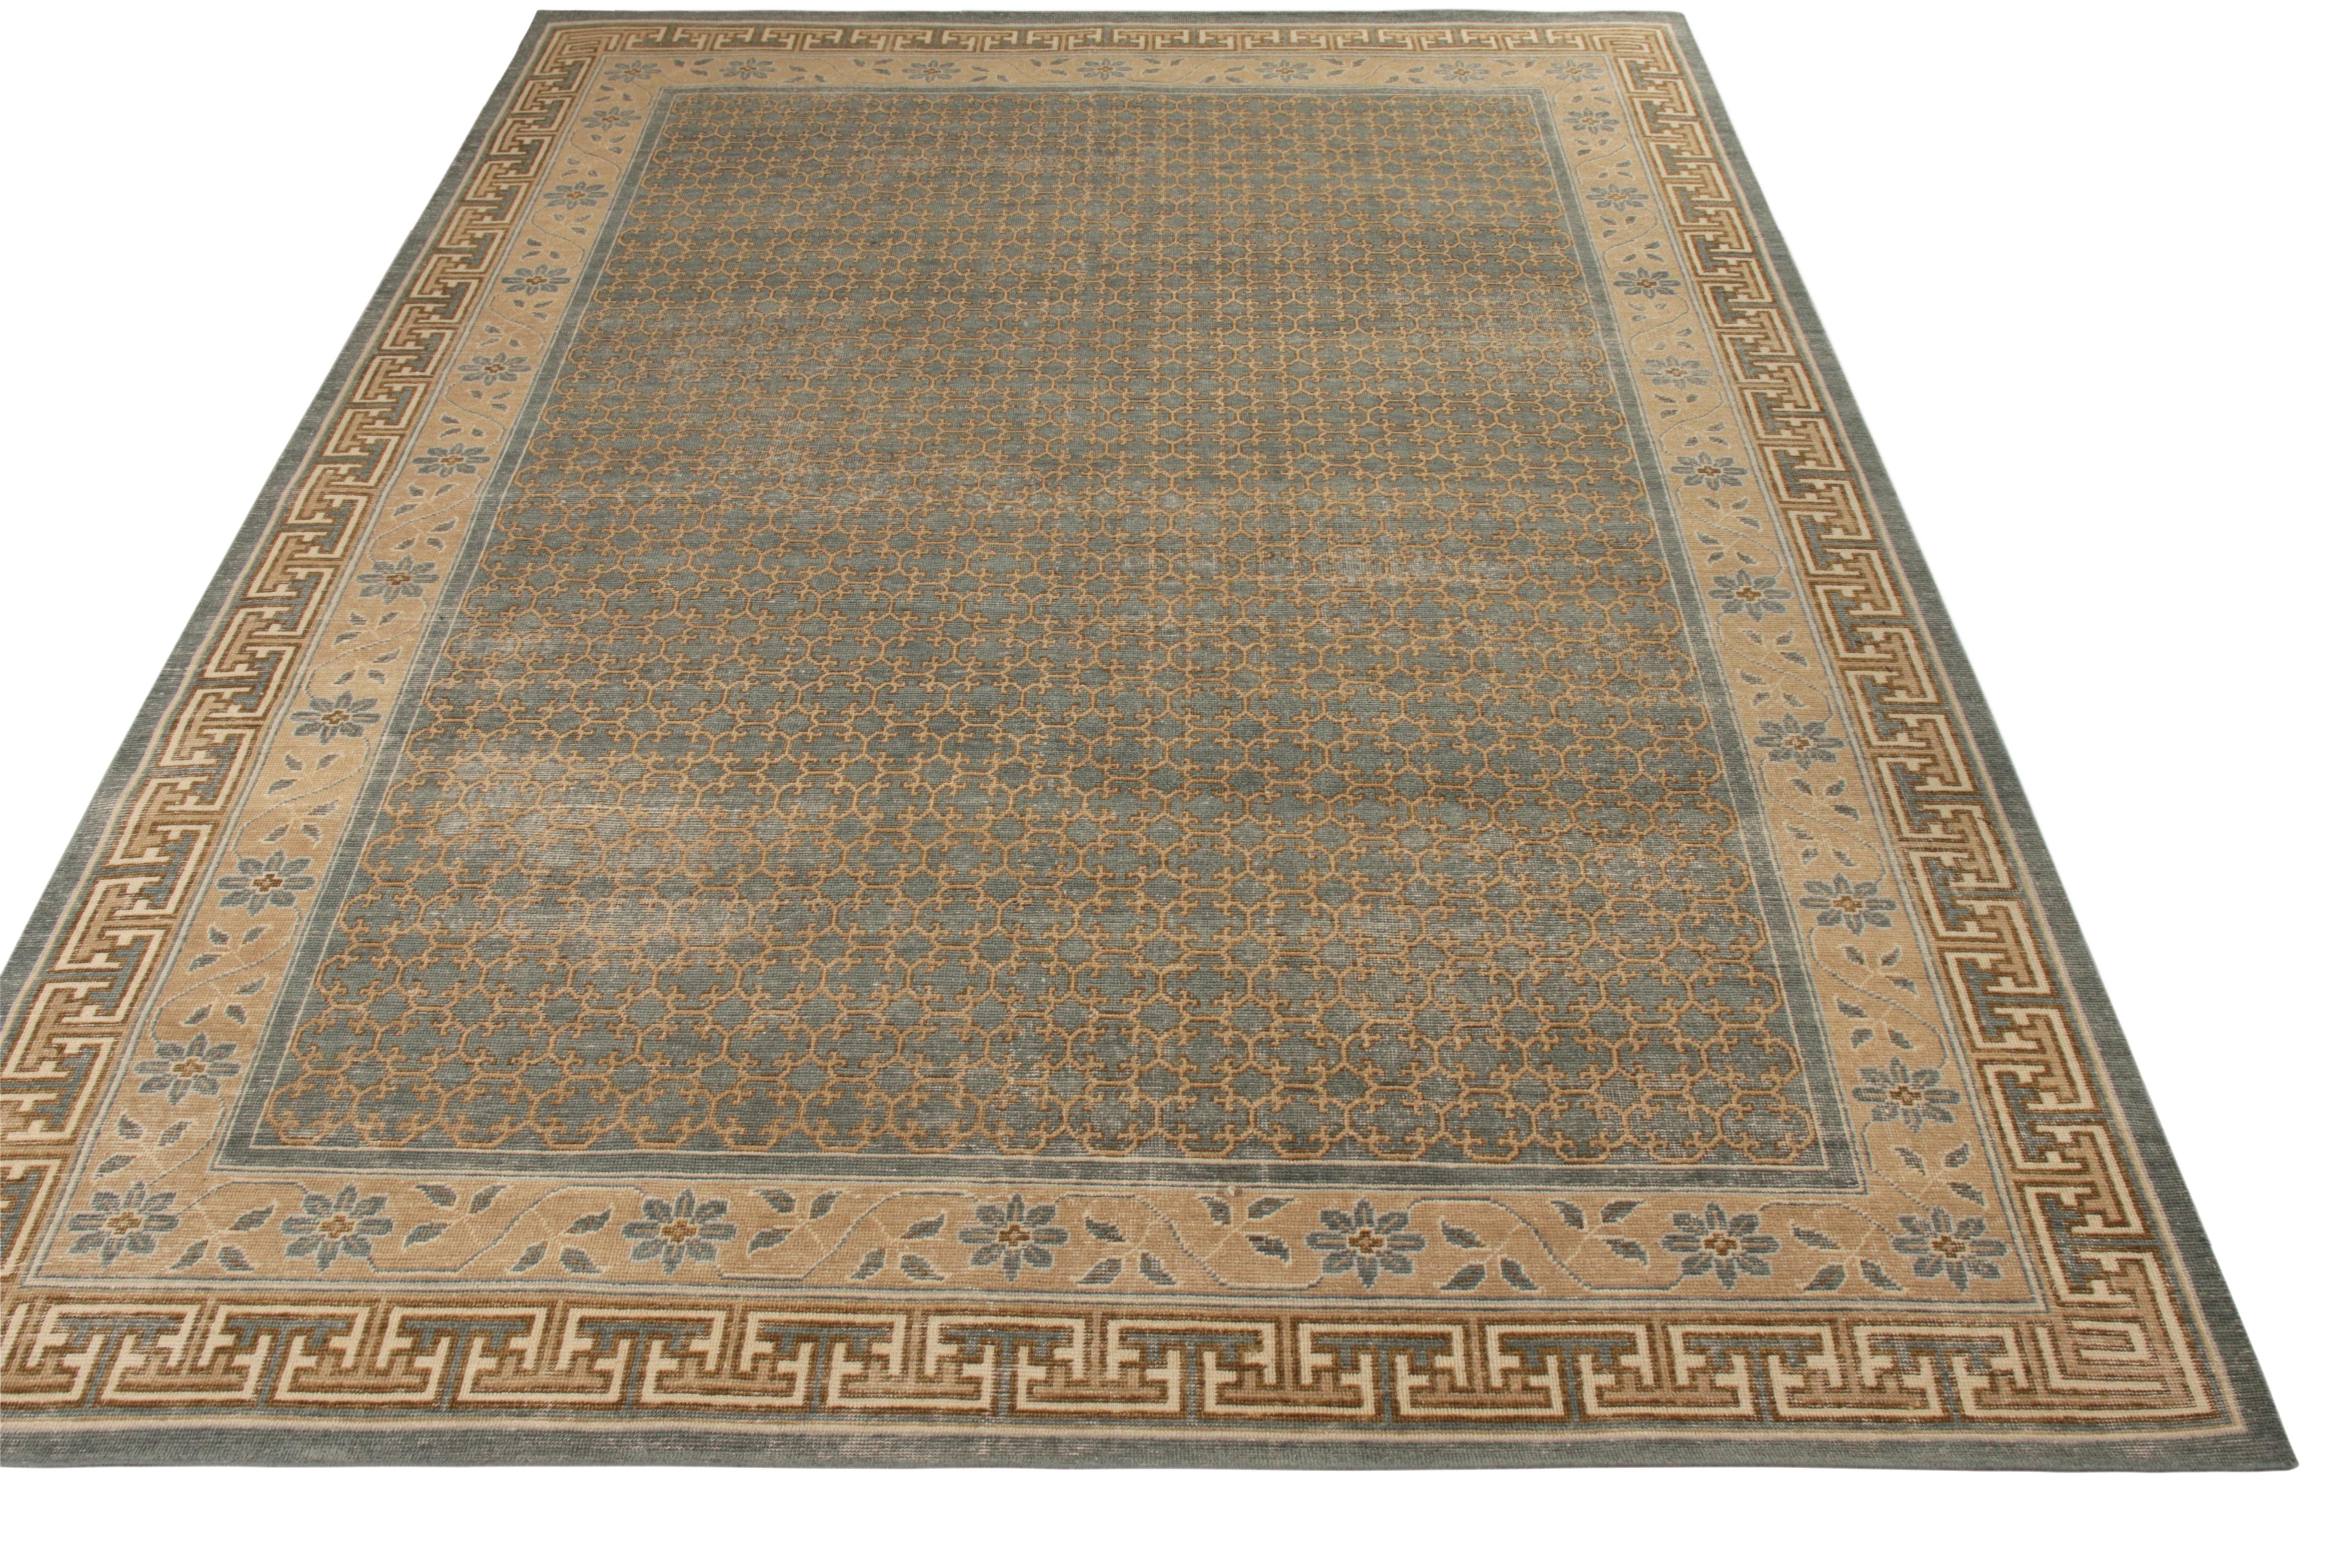 An ode to celebrated Khotan rug styles from the classic selections in Rug & Kilim’s Homage Collection, available as a custom rug. Hand knotted in wool with a shabby-chic, distressed texture, enjoying complementary blue and beige-brown hues. Further